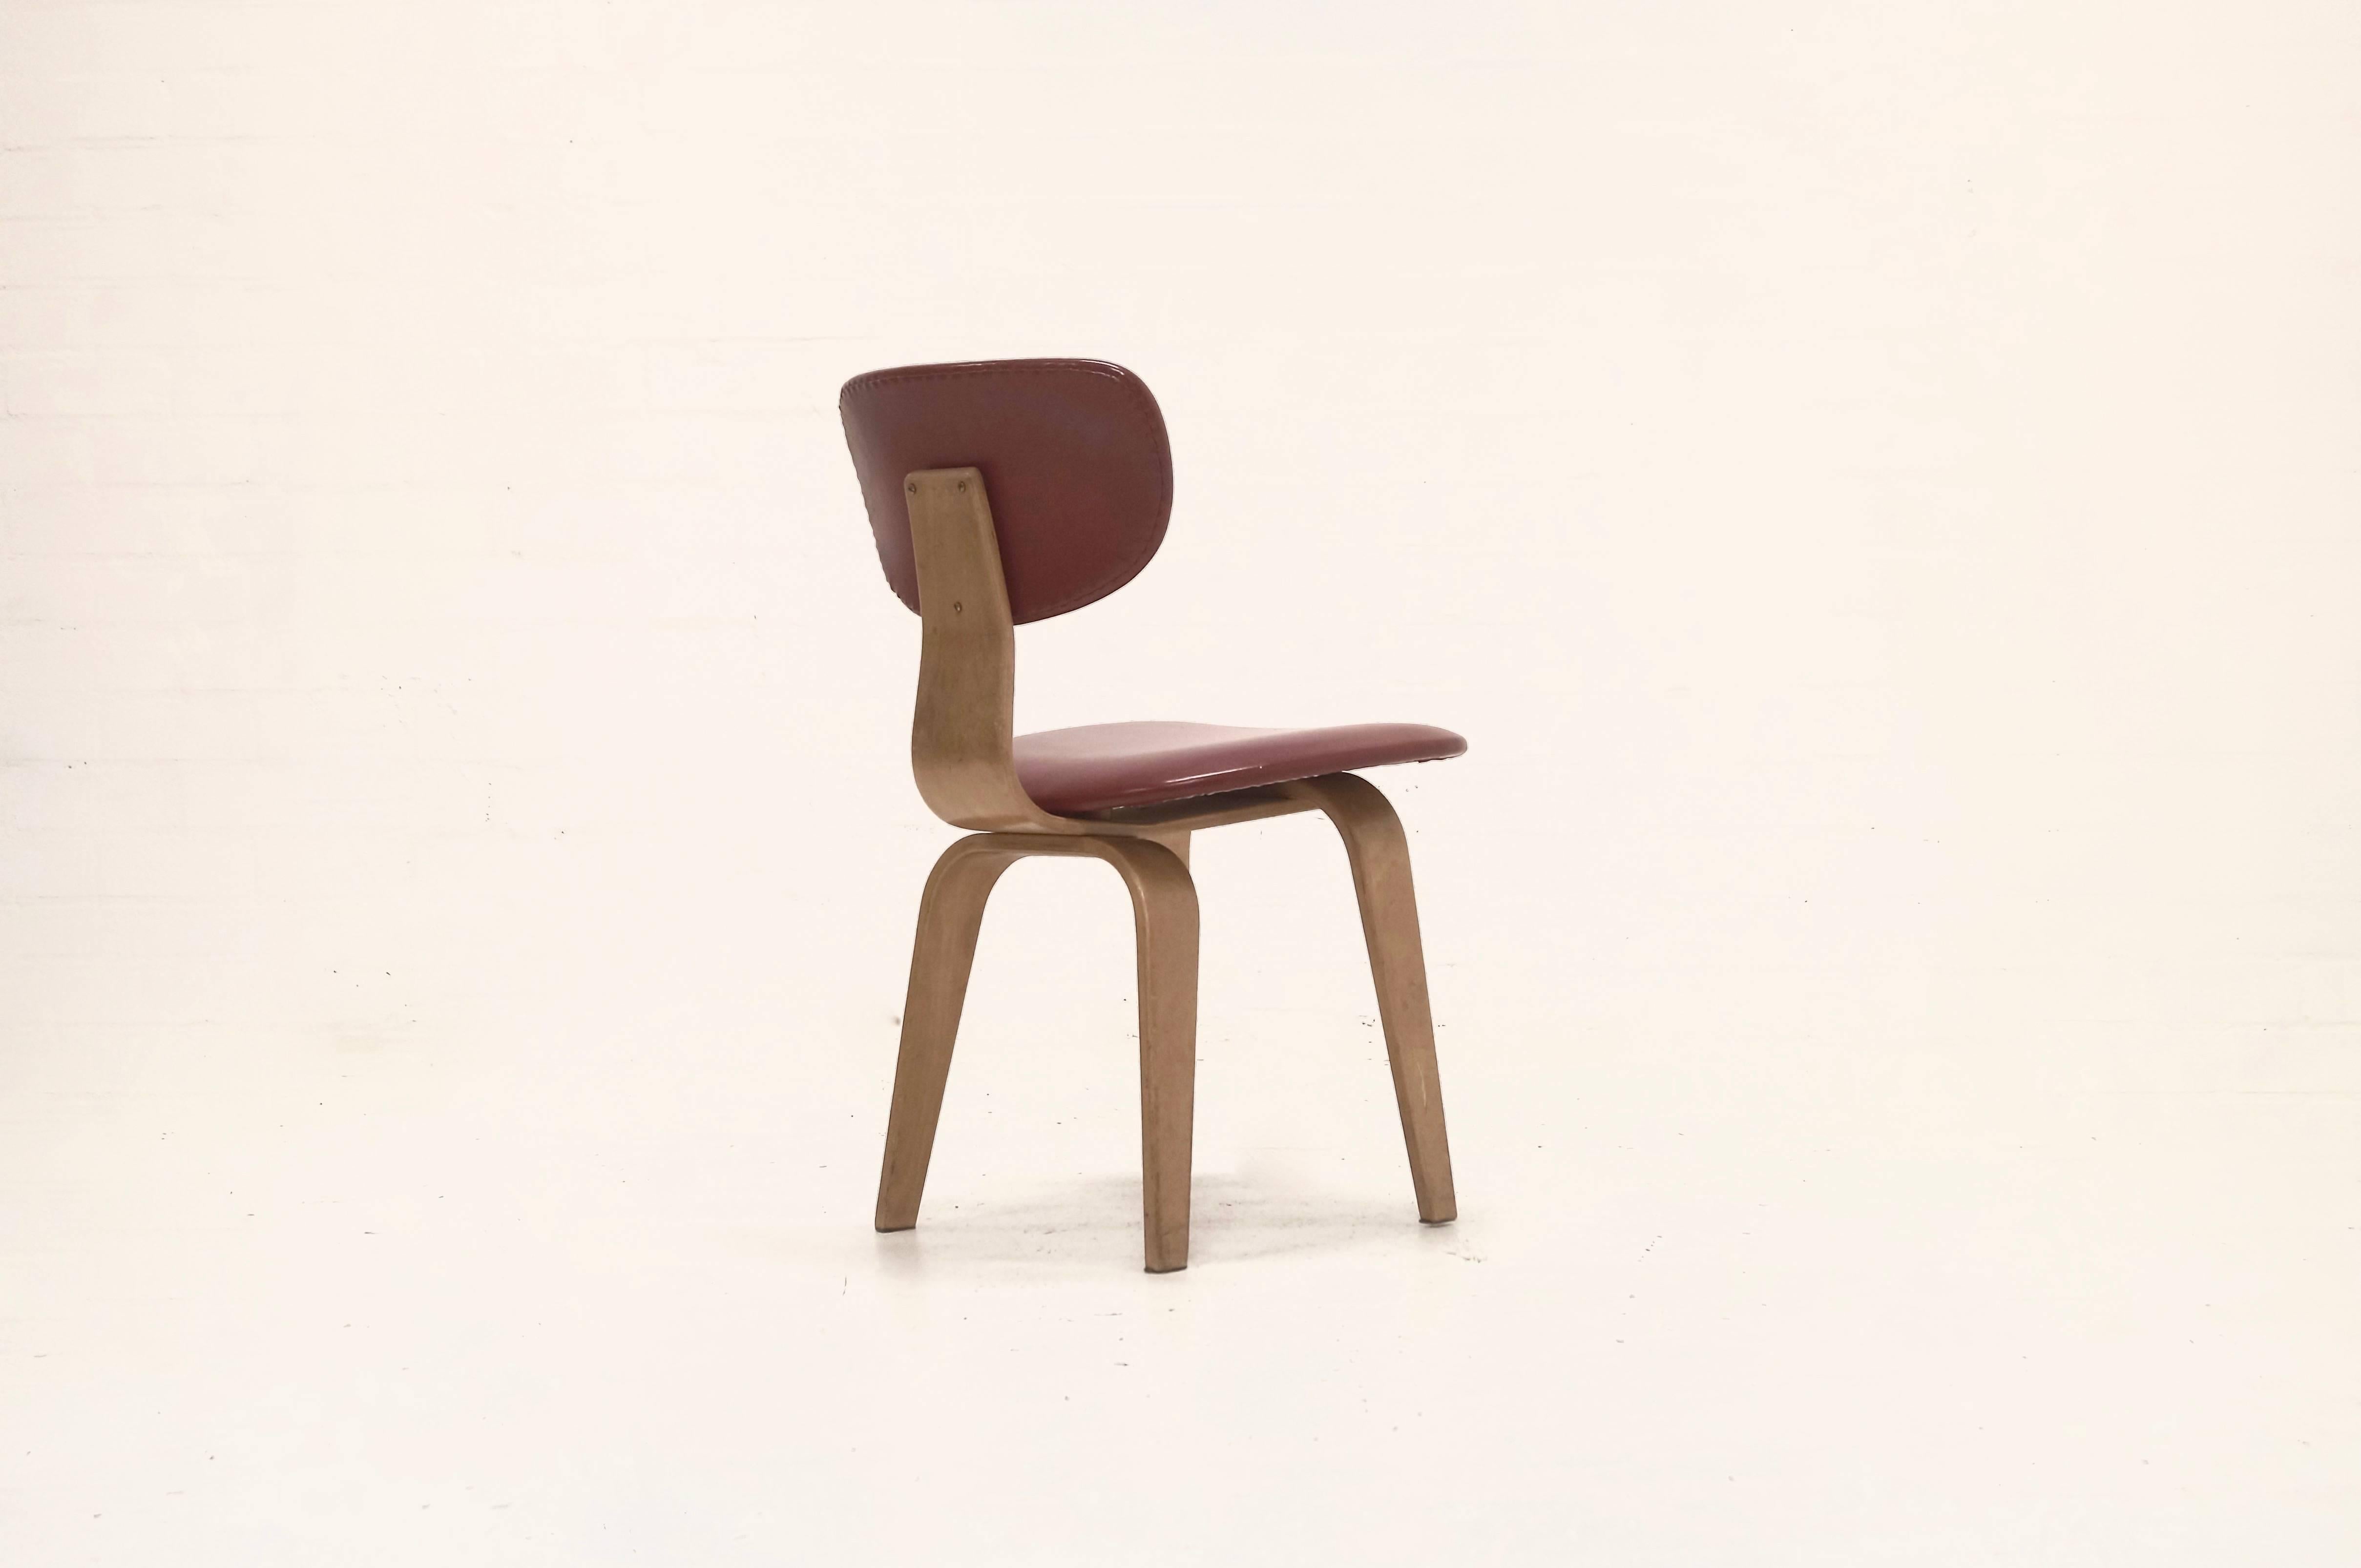 Beautiful SB02 dining chair or side chair designed in 1952 by Cees Braakman for UMS Pastoe. The chair is made from birch plywood with an skai upholstered seat and back. Remains in very good condition.